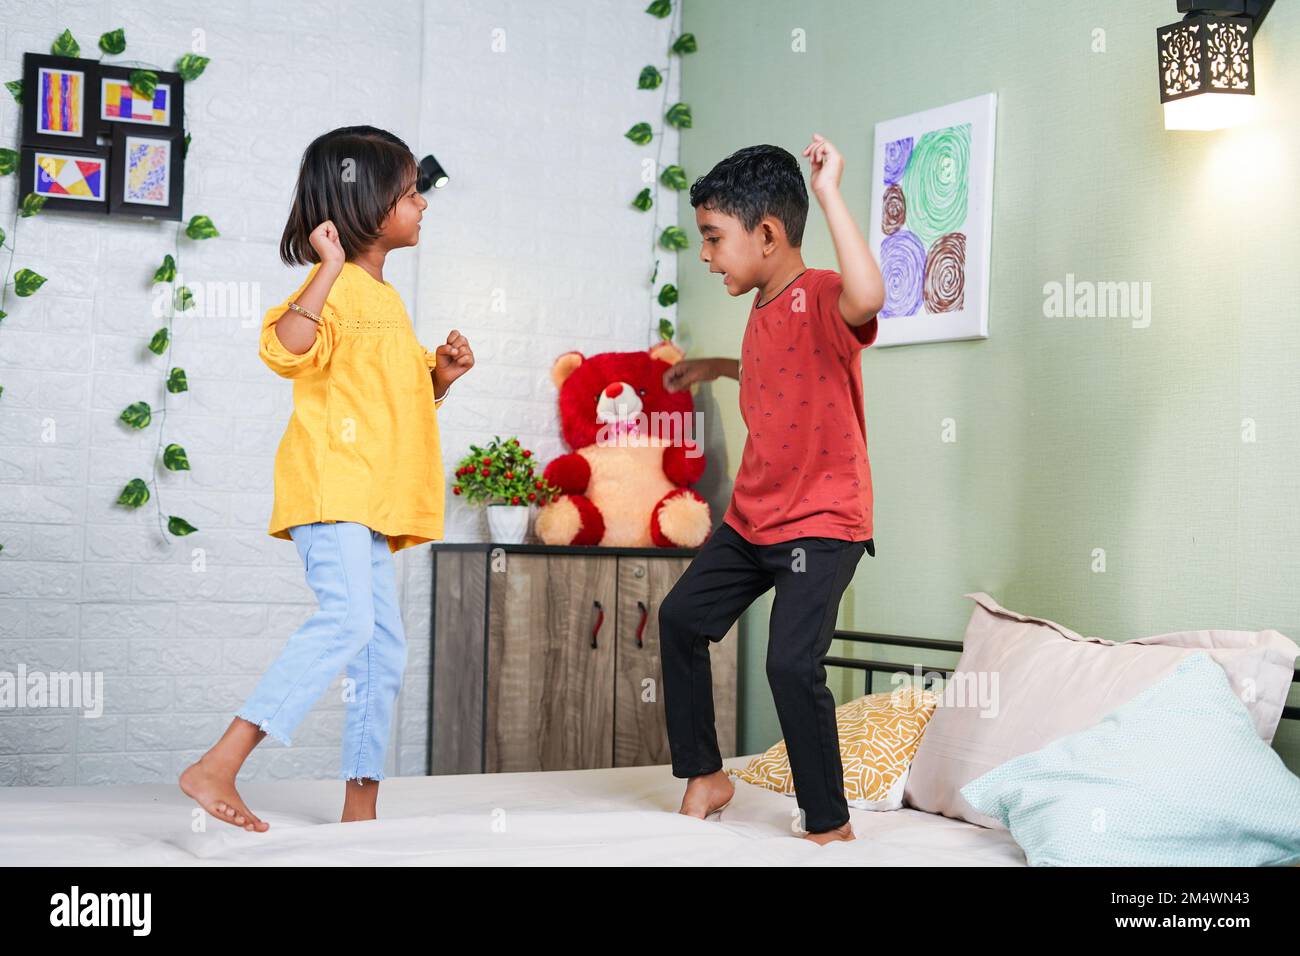 Happy smiling sibling kids dancing by jumping on bed at home - concept of playful childhood, bonding and relationship. Stock Photo